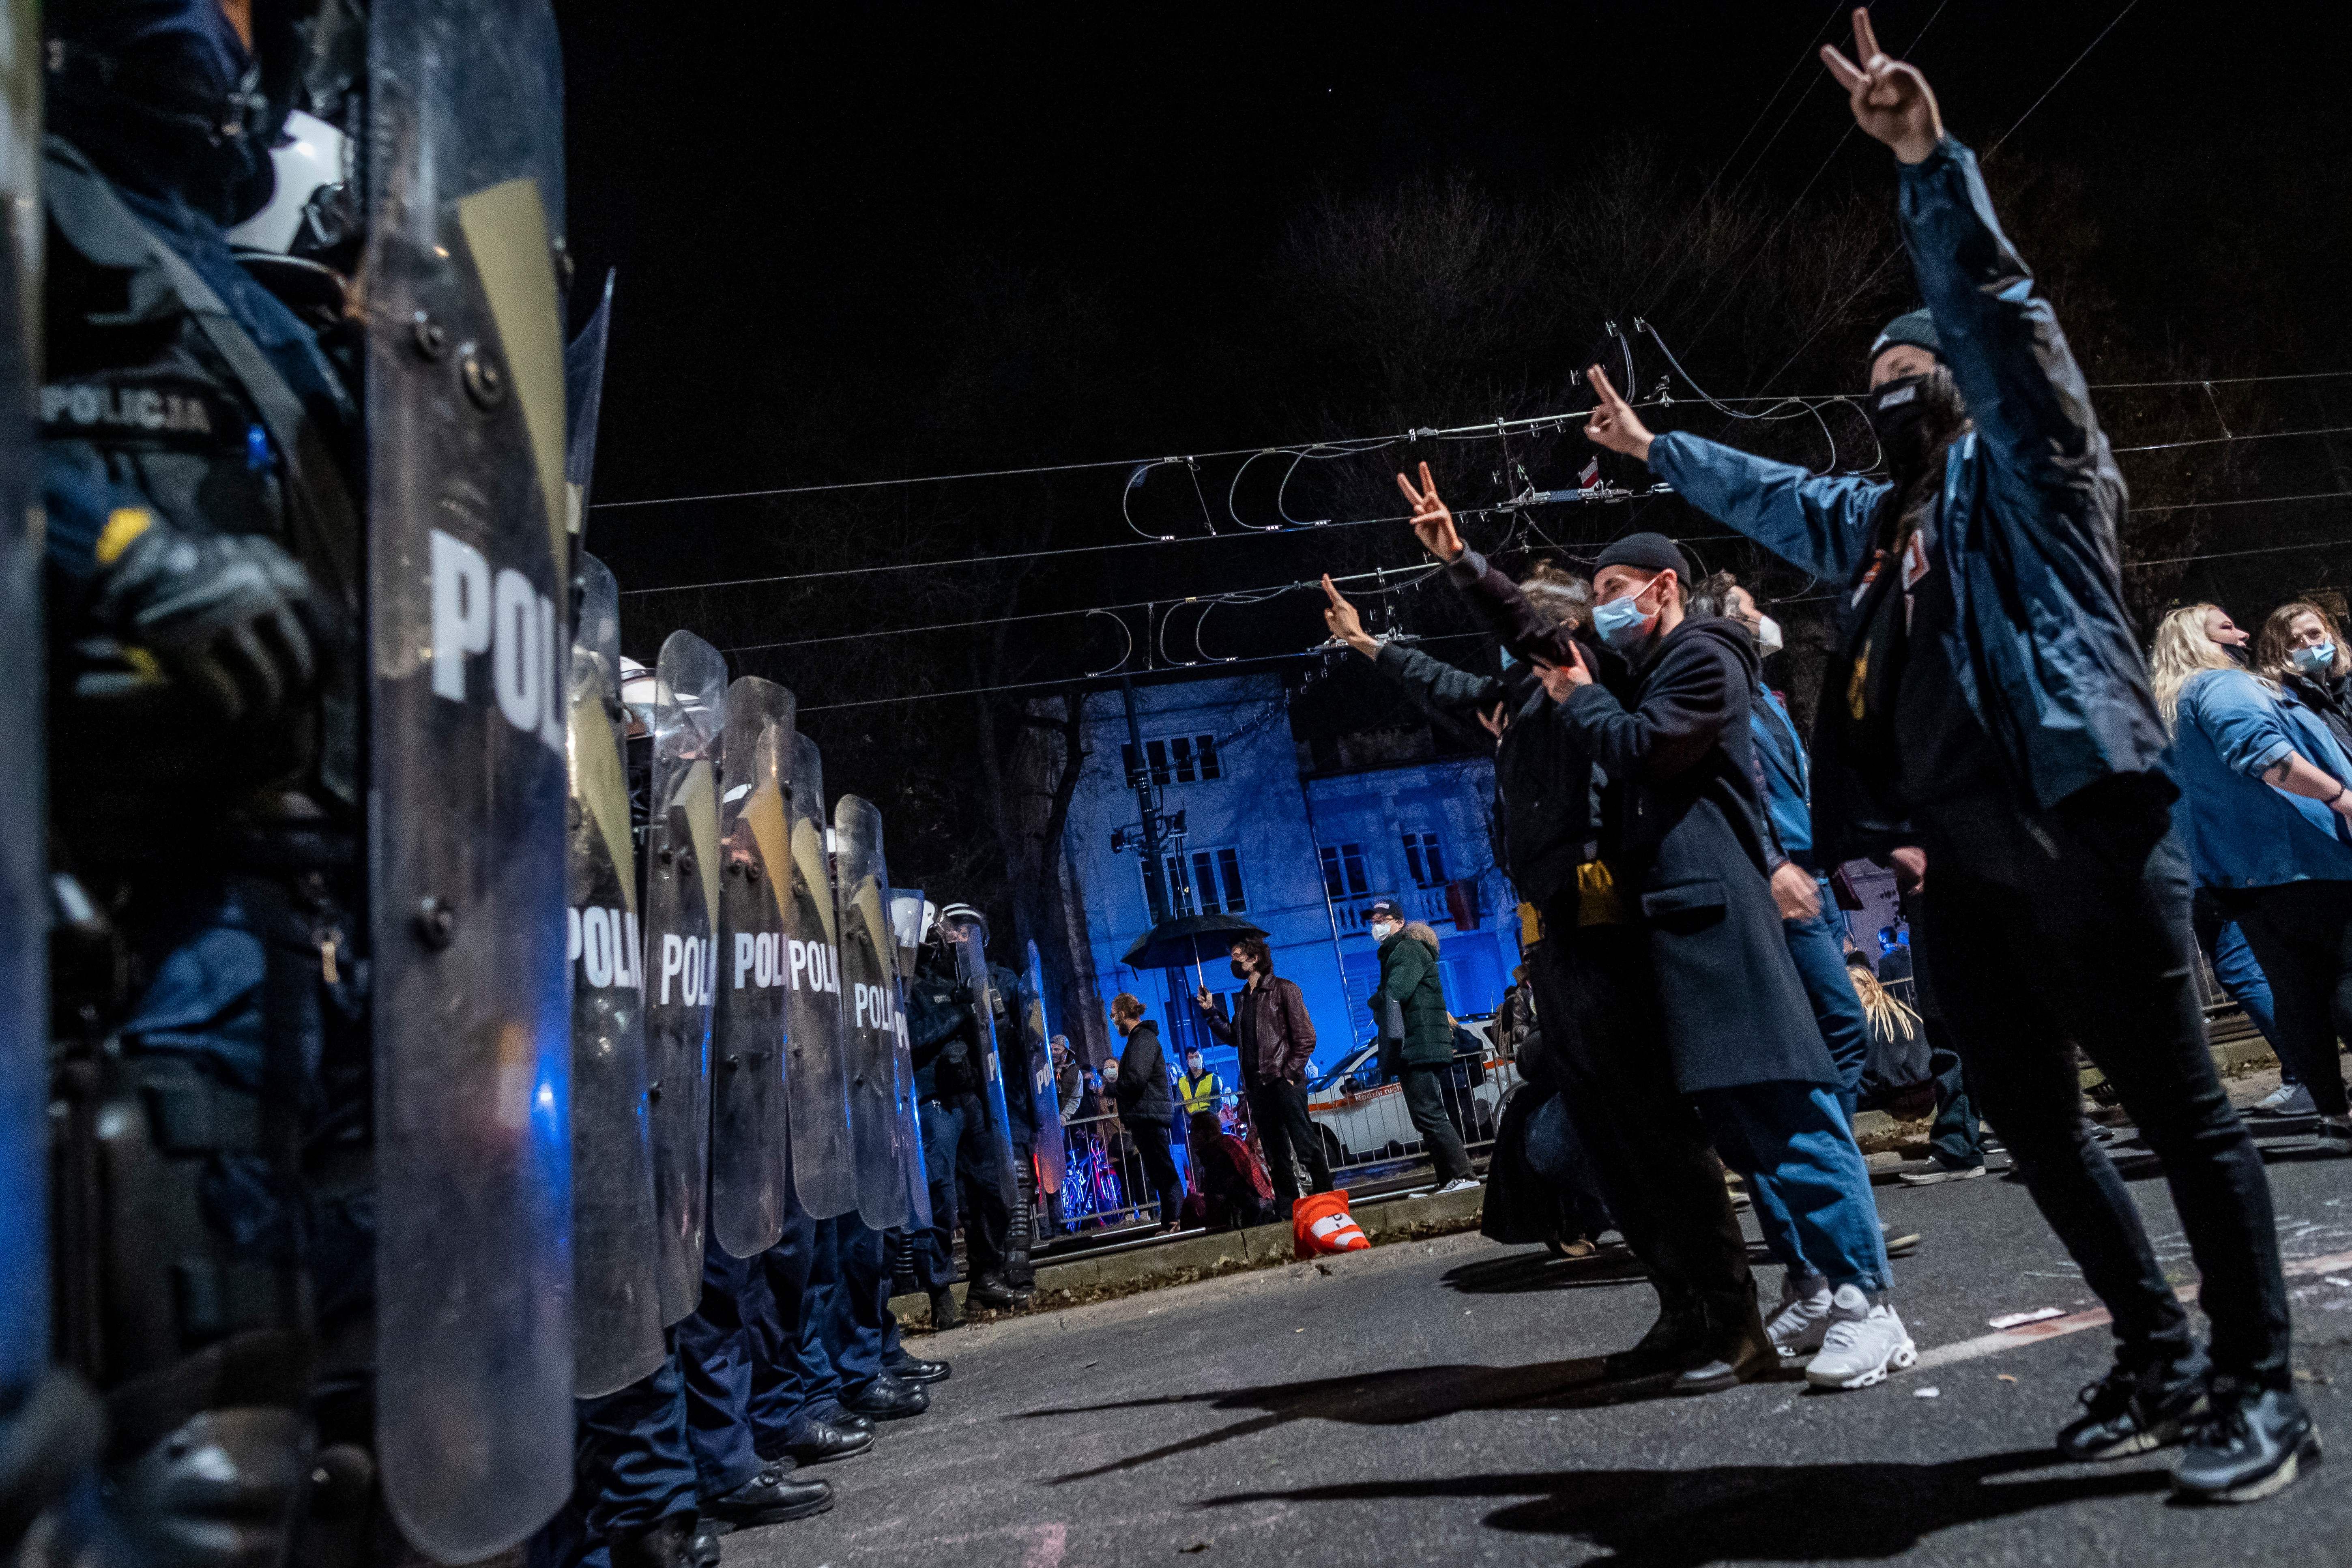 Protestors face off with riot police guarding the house of Jaroslaw Kaczynski.